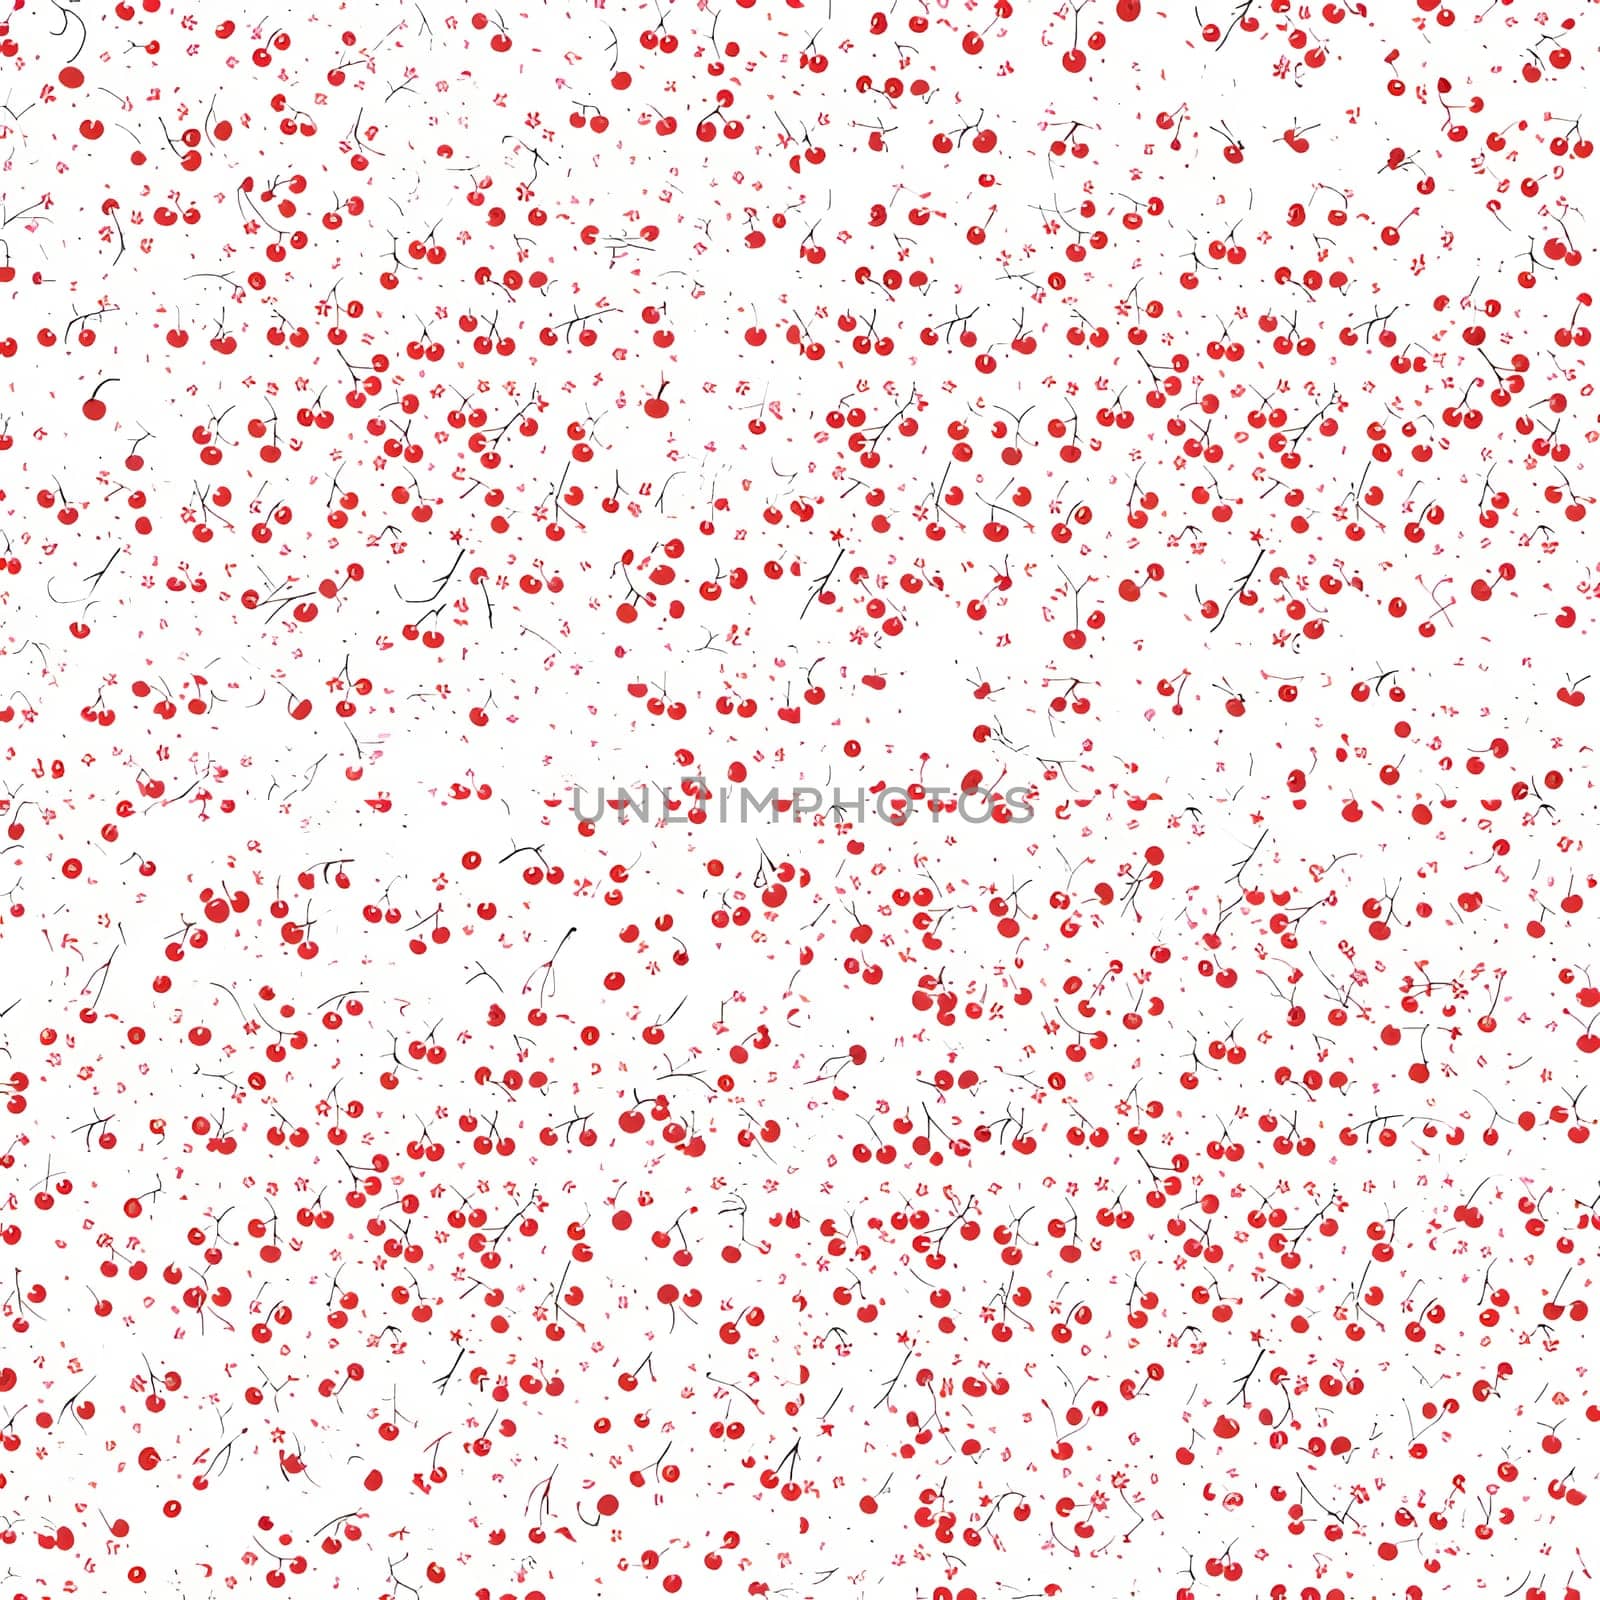 Patterns and banners backgrounds: Seamless pattern with red berries on white background. Vector illustration.